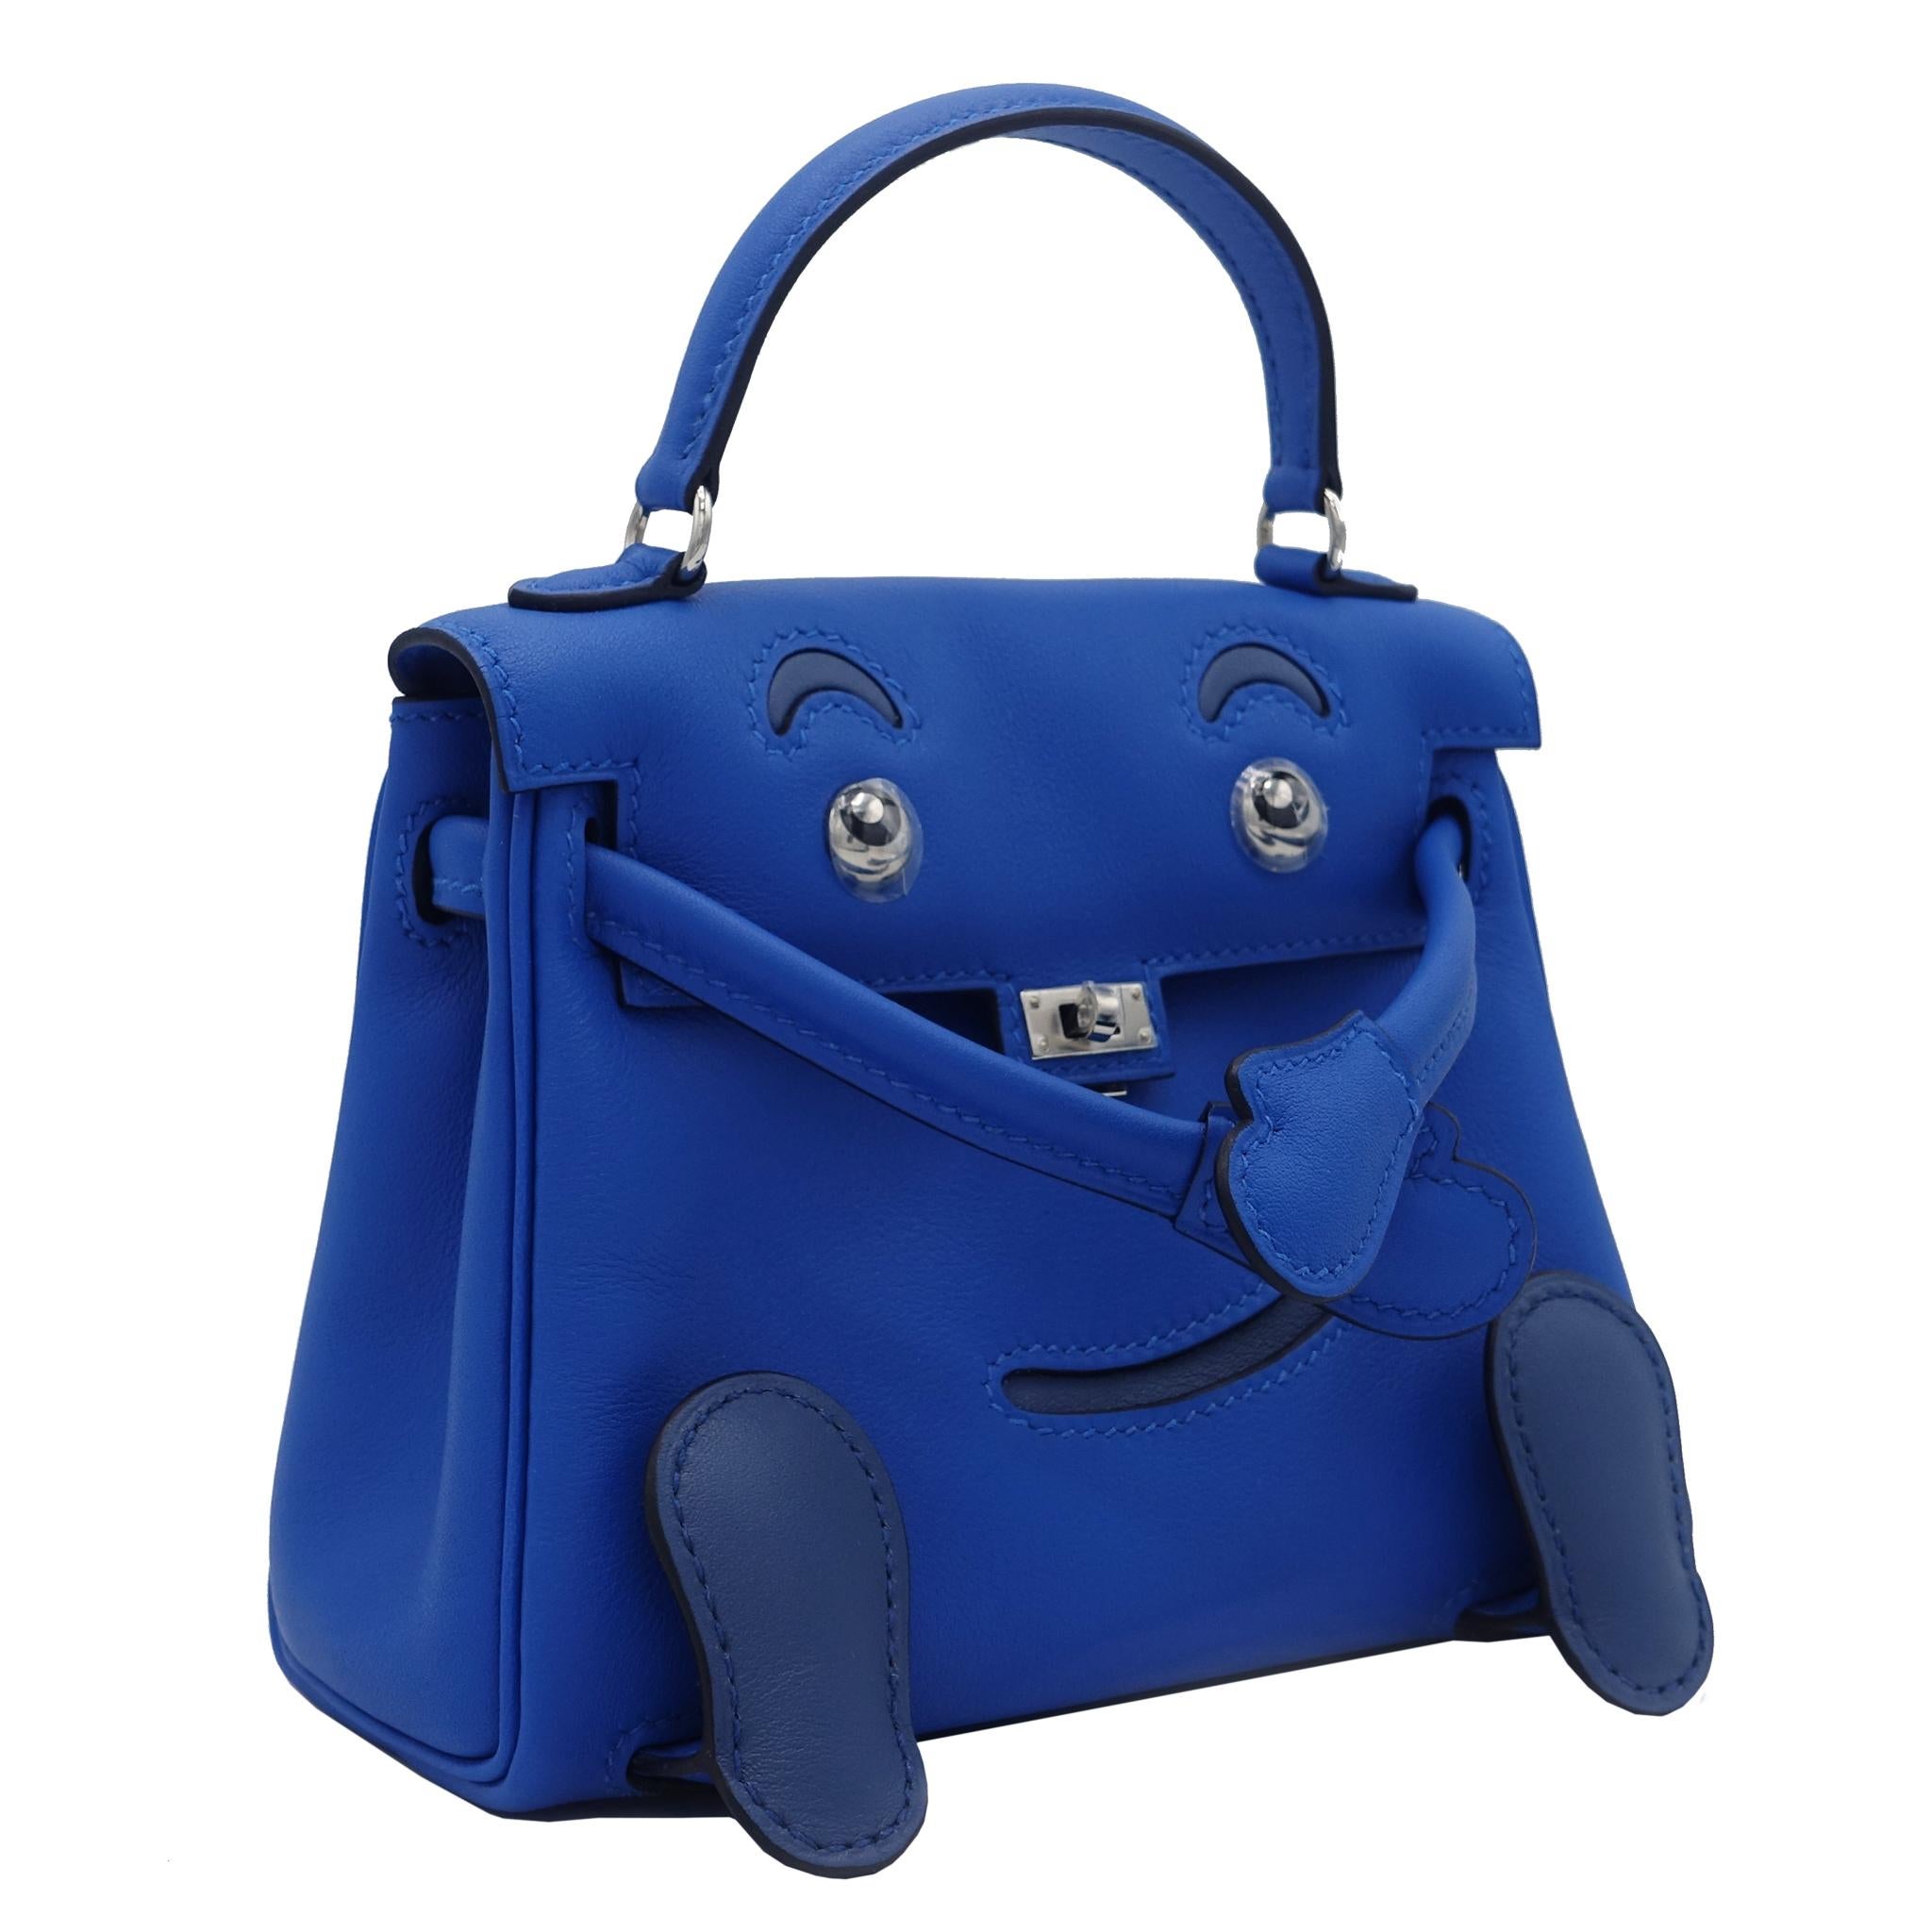 Brand: Hermès 
Style: Kelly Idole 
Size: 15cm
Color: Blue Zellige & Blue Agate
Leather: Swift
Hardware: Palladium
Stamp: 2019 D

Condition: Pristine, never carried: The item has never been carried and is in pristine condition complete with all